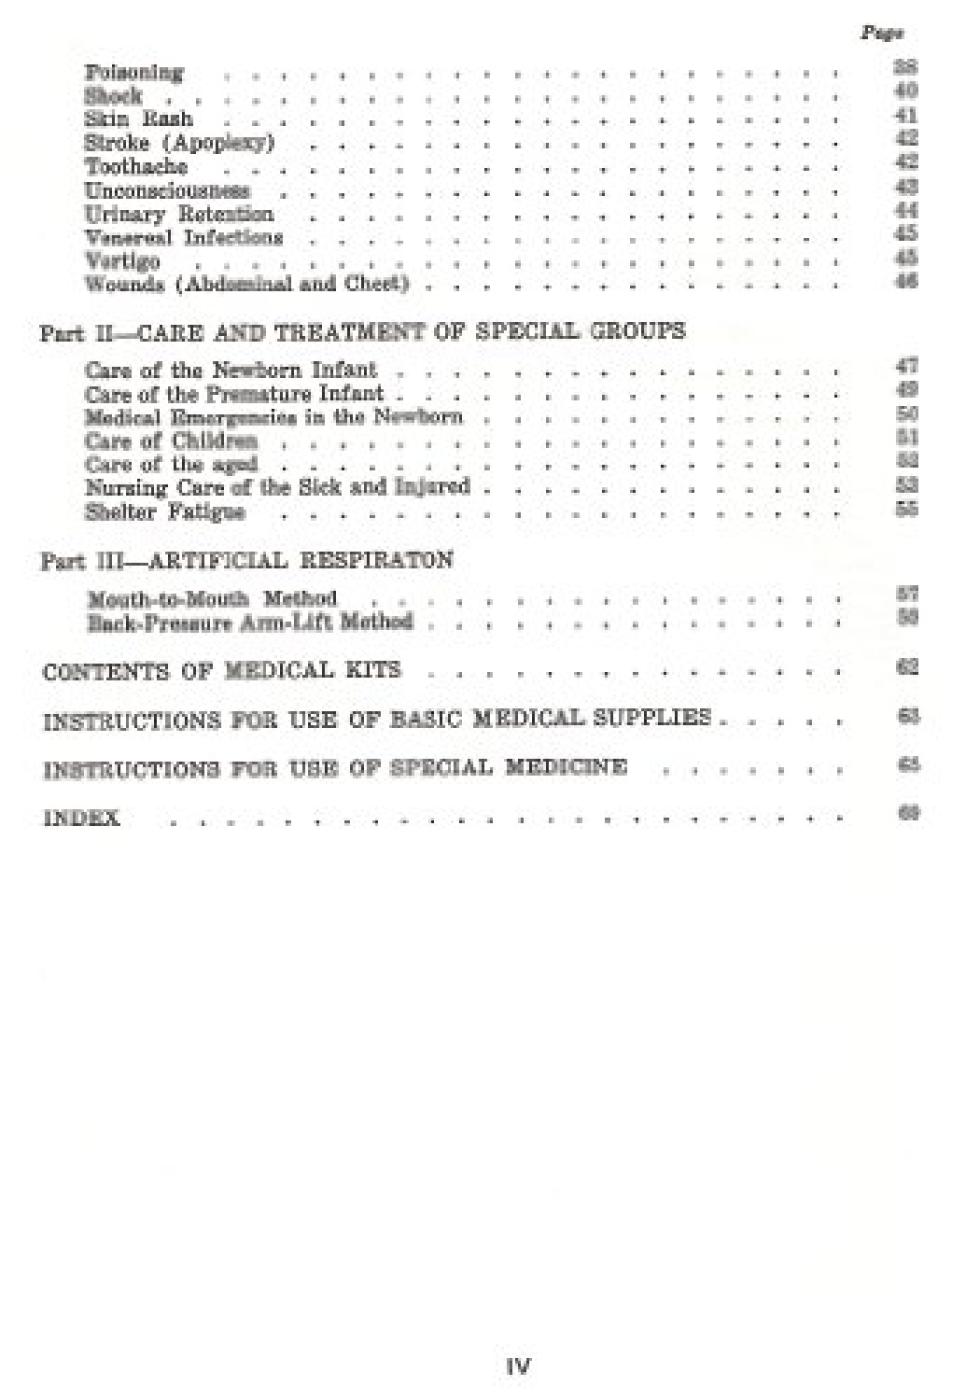 The Emergency Medical Care for Disaster Manual